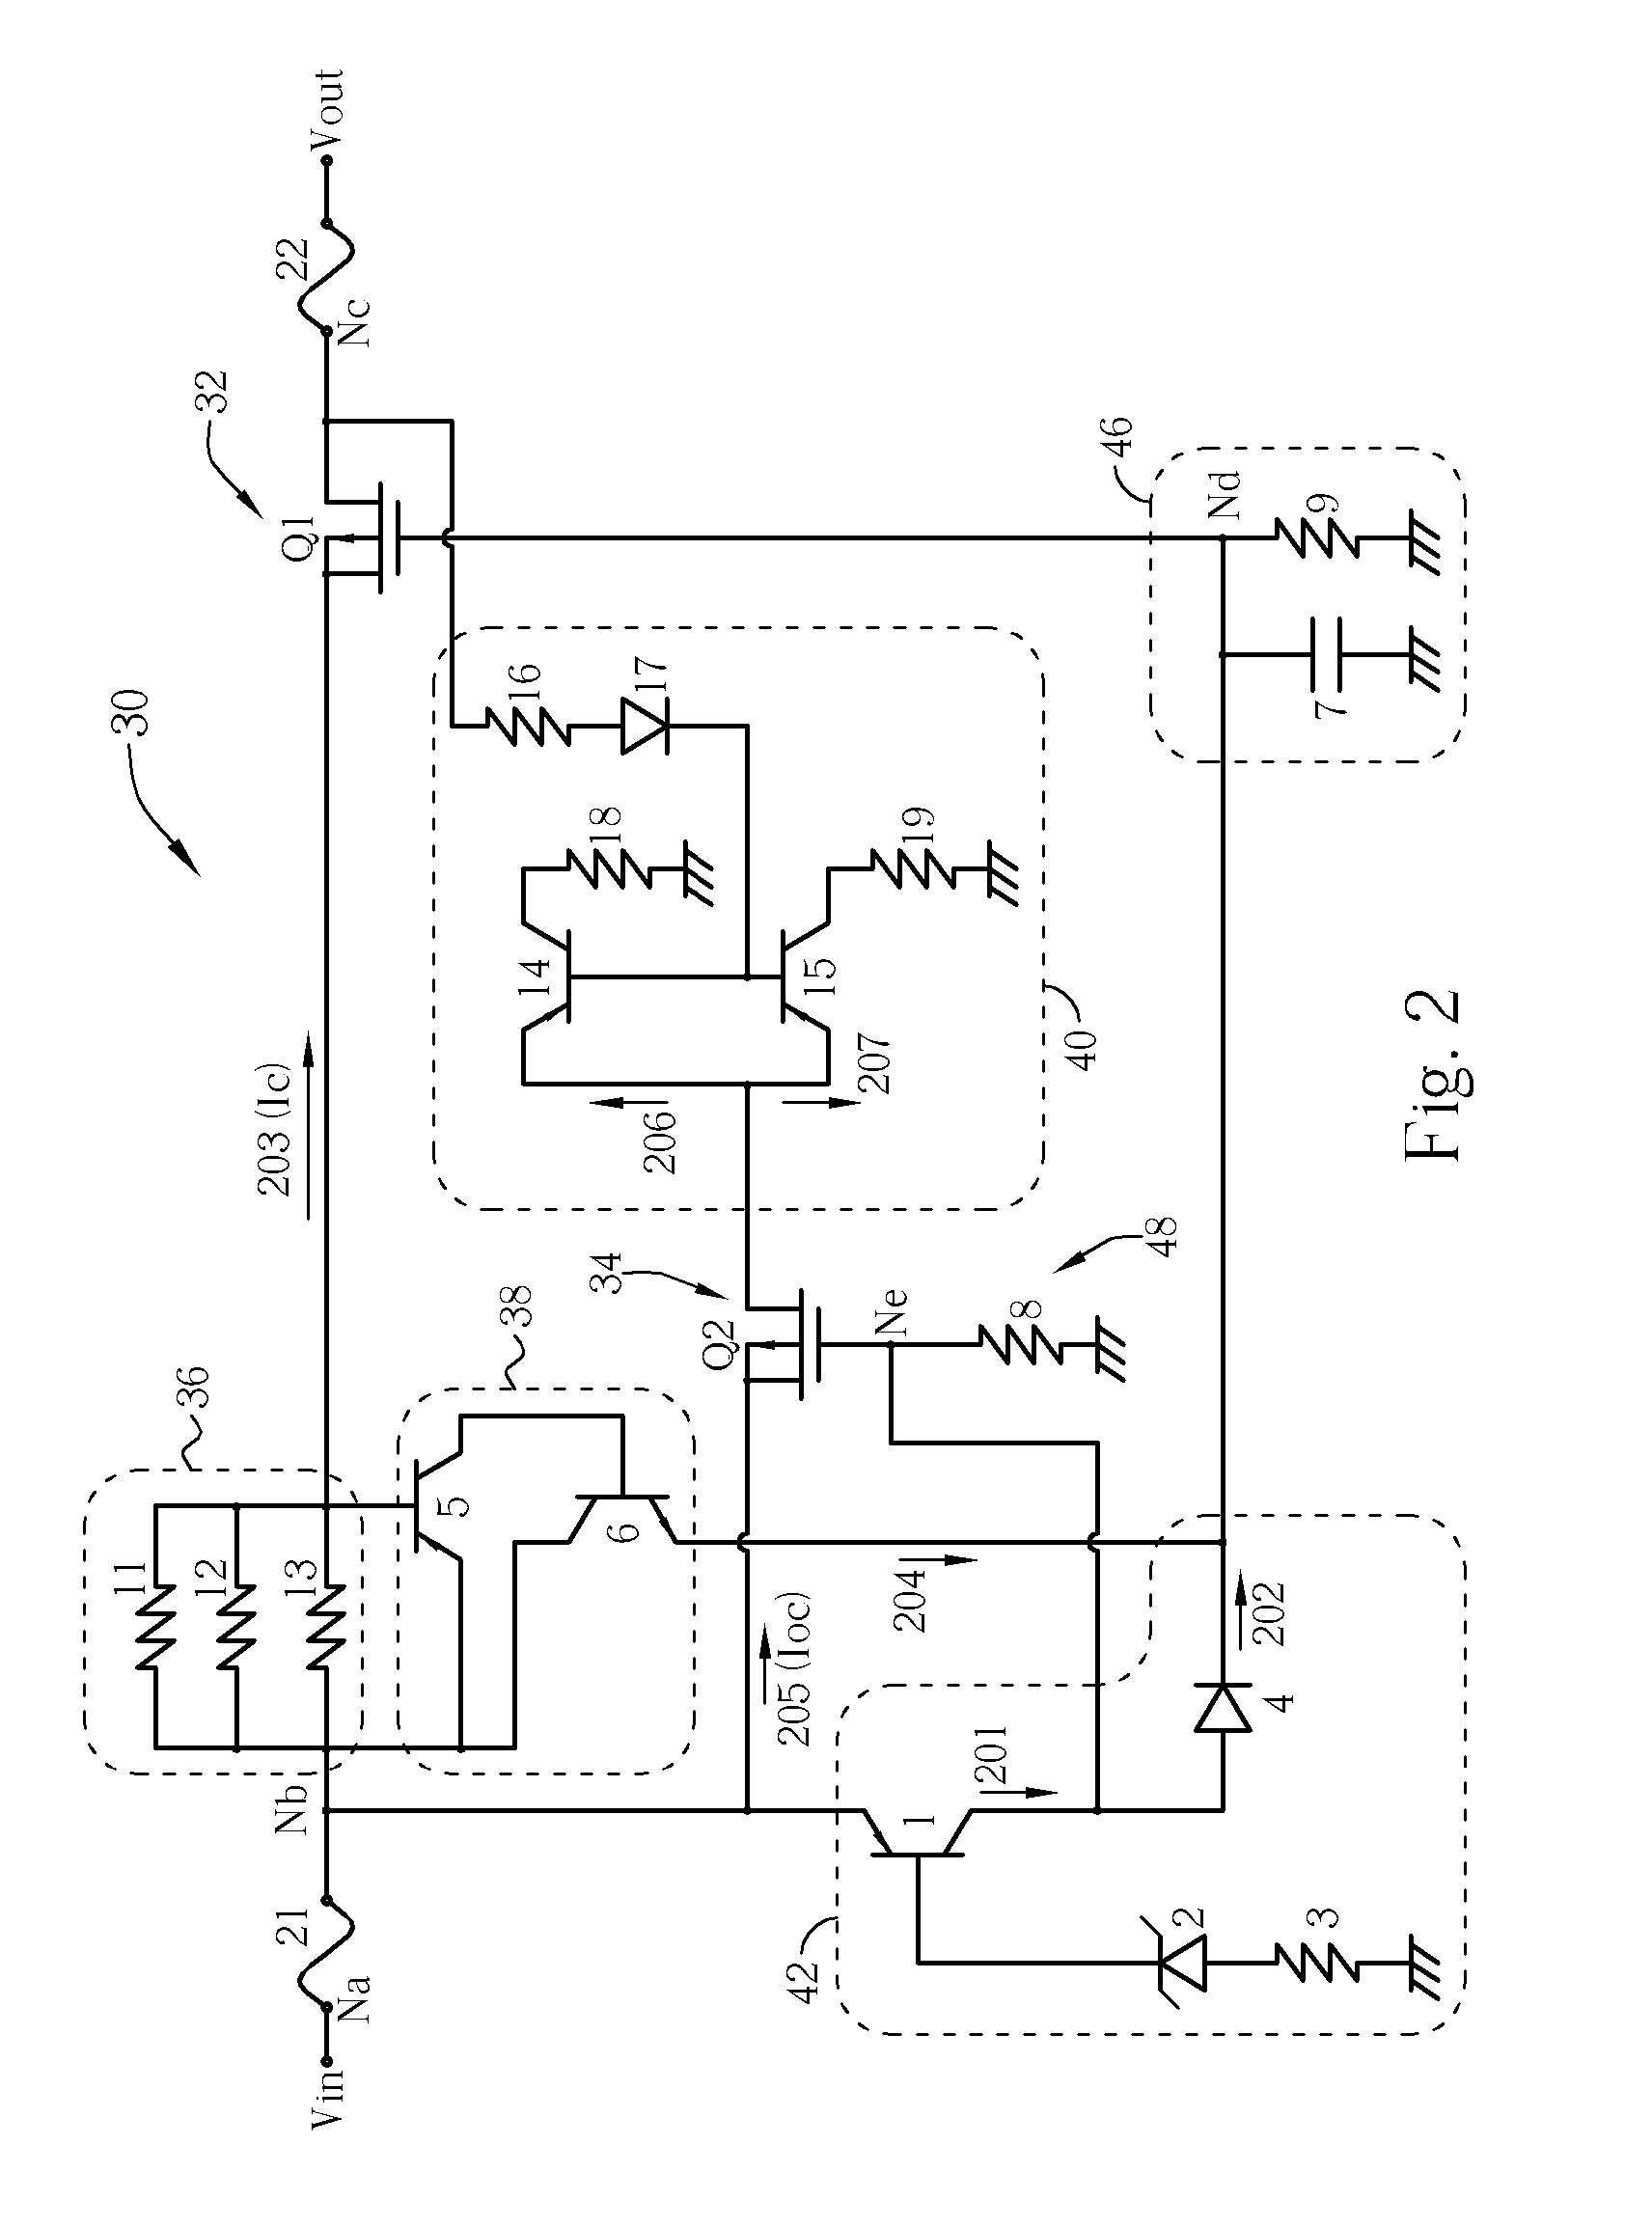 Circuit for charging protection with enhanced overcurrent protection circuitry